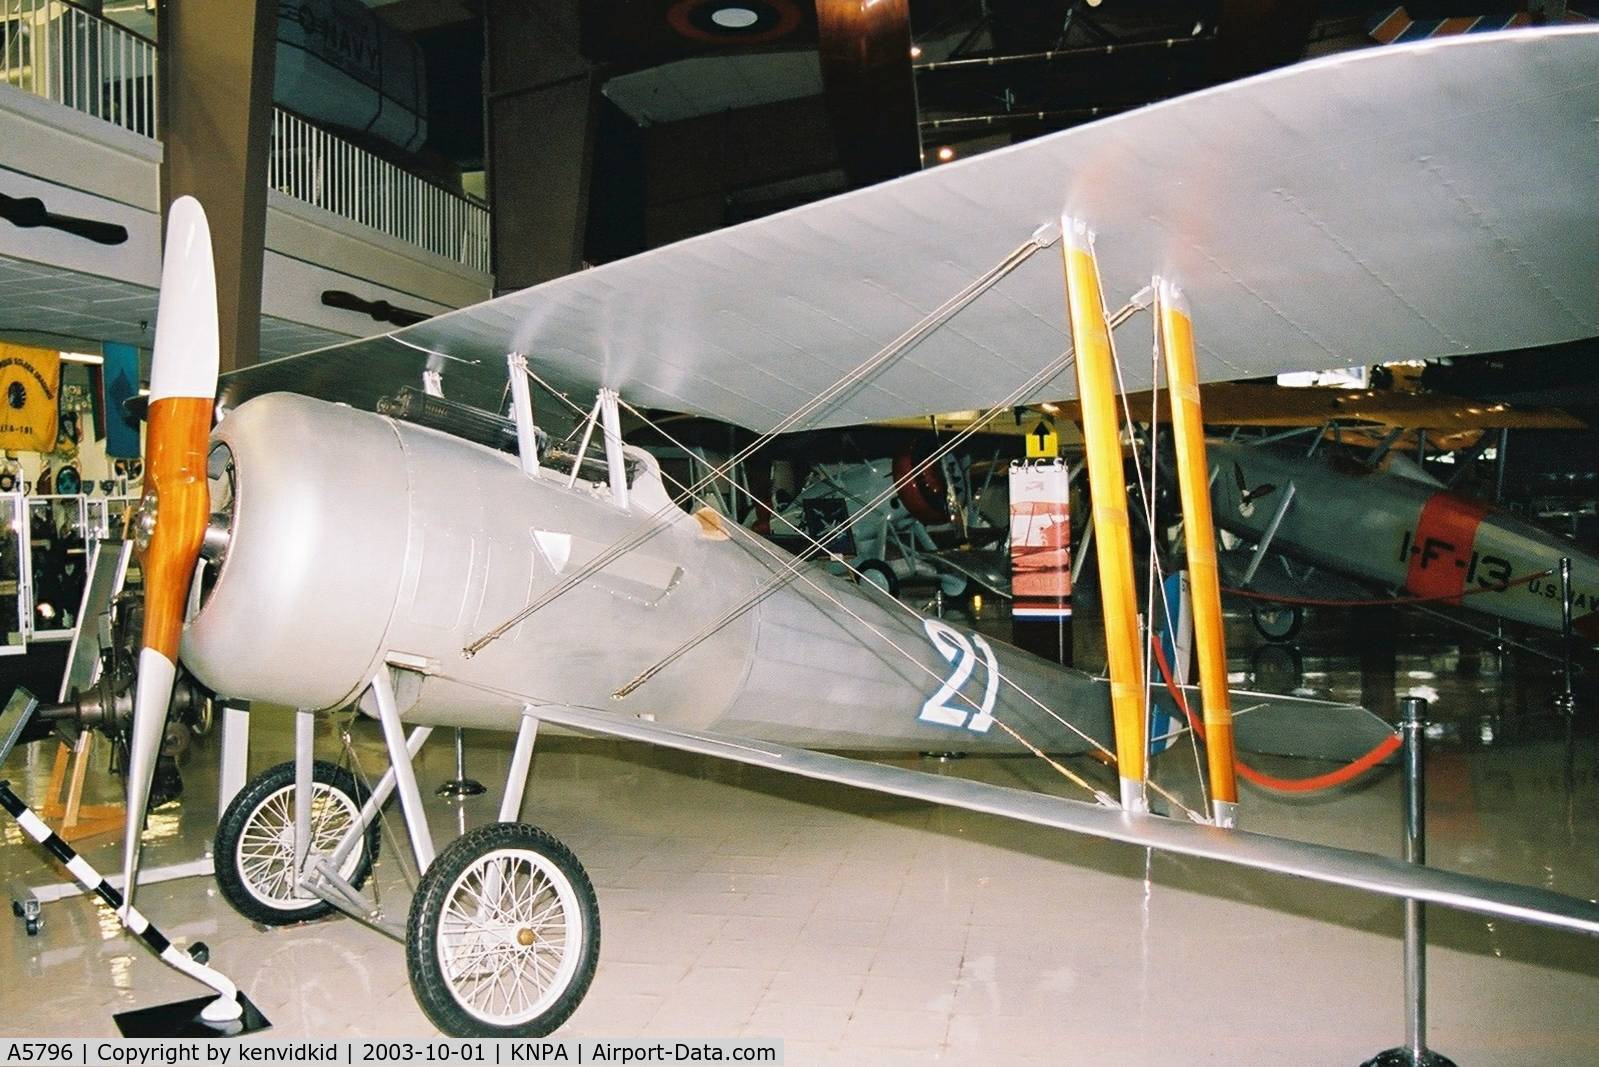 A5796, Nieuport 28 C.1 Bebe Replica C/N Not found 5796, On display at the Museum of Naval Aviation, Pensacola.